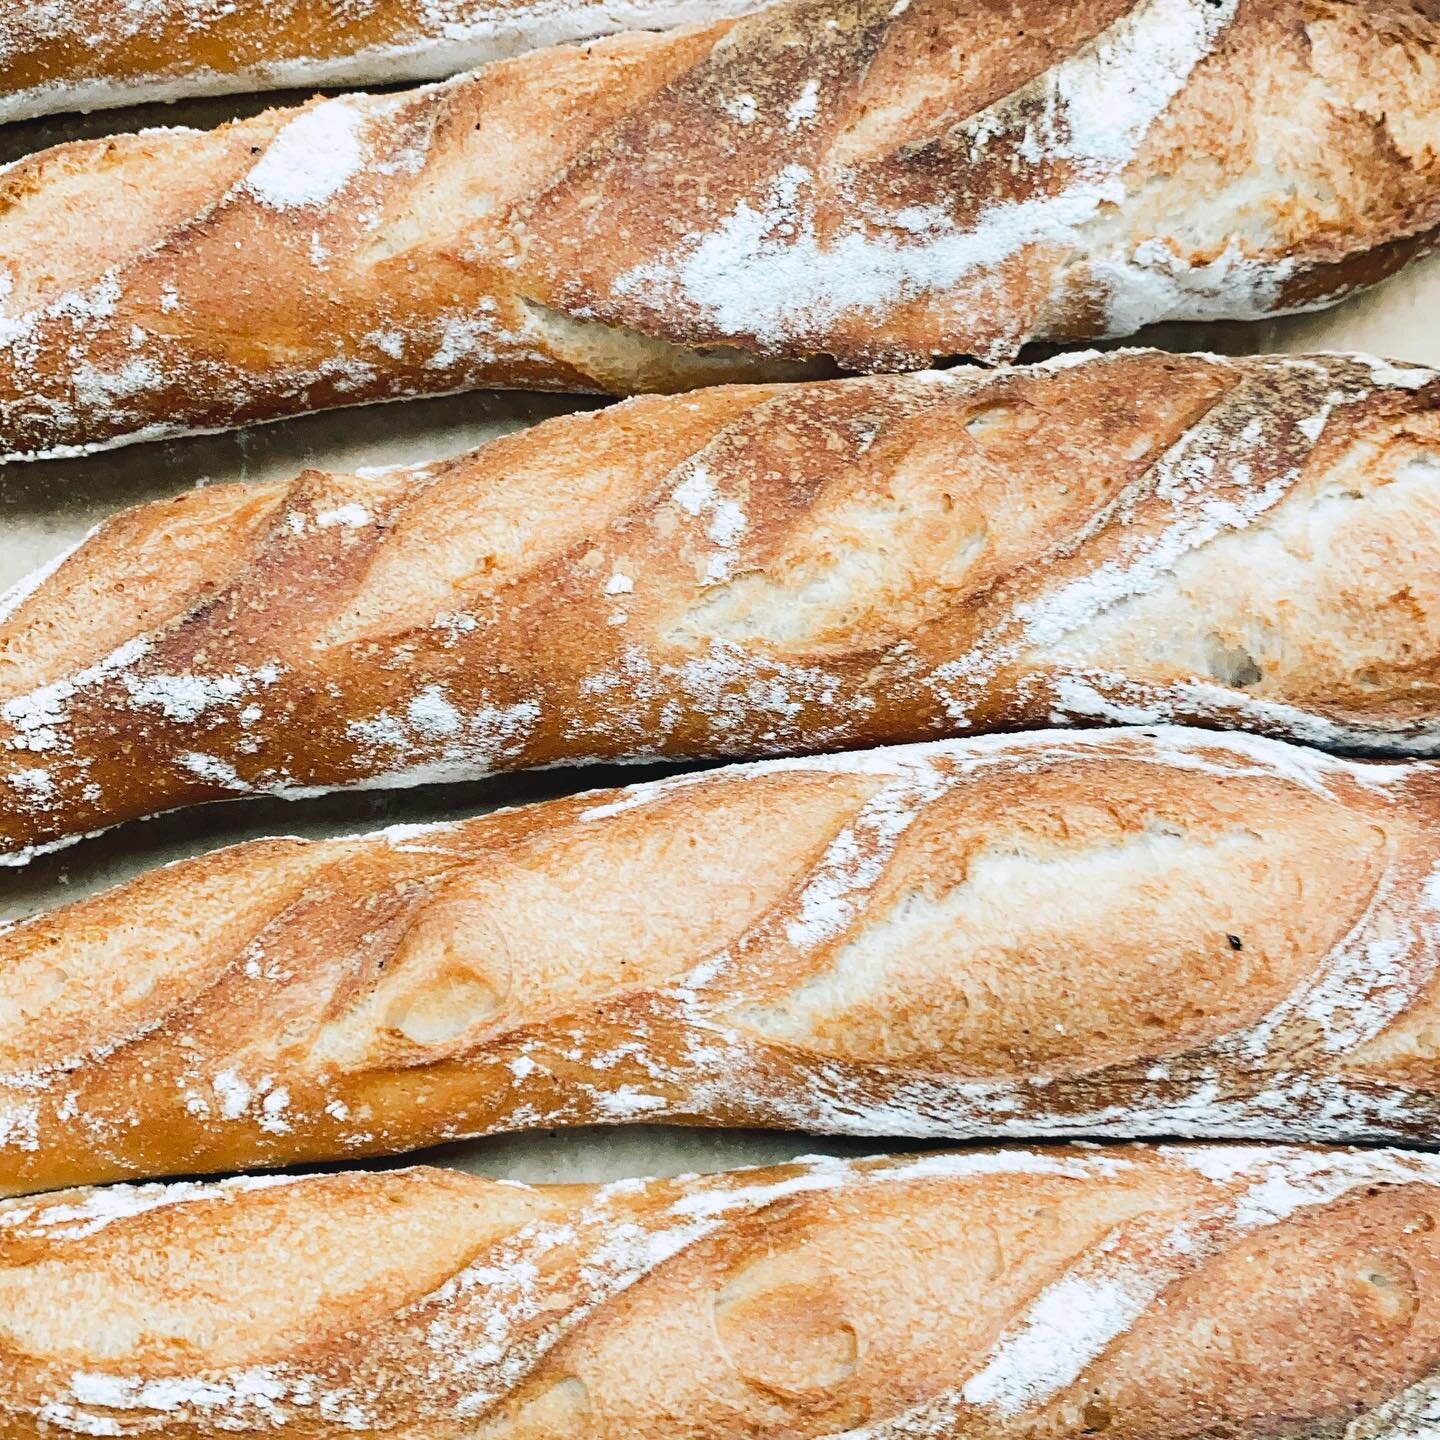 Weekend breads! 

Every weekend we get a delivery of freshly baked breads from the @sticky_fig_catering HQ including homemade baguettes, sourdoughs &amp; rustic multigrain loaves. 

#bread #breaddelivery #weekendbread #homemade #artisanbread #artisan